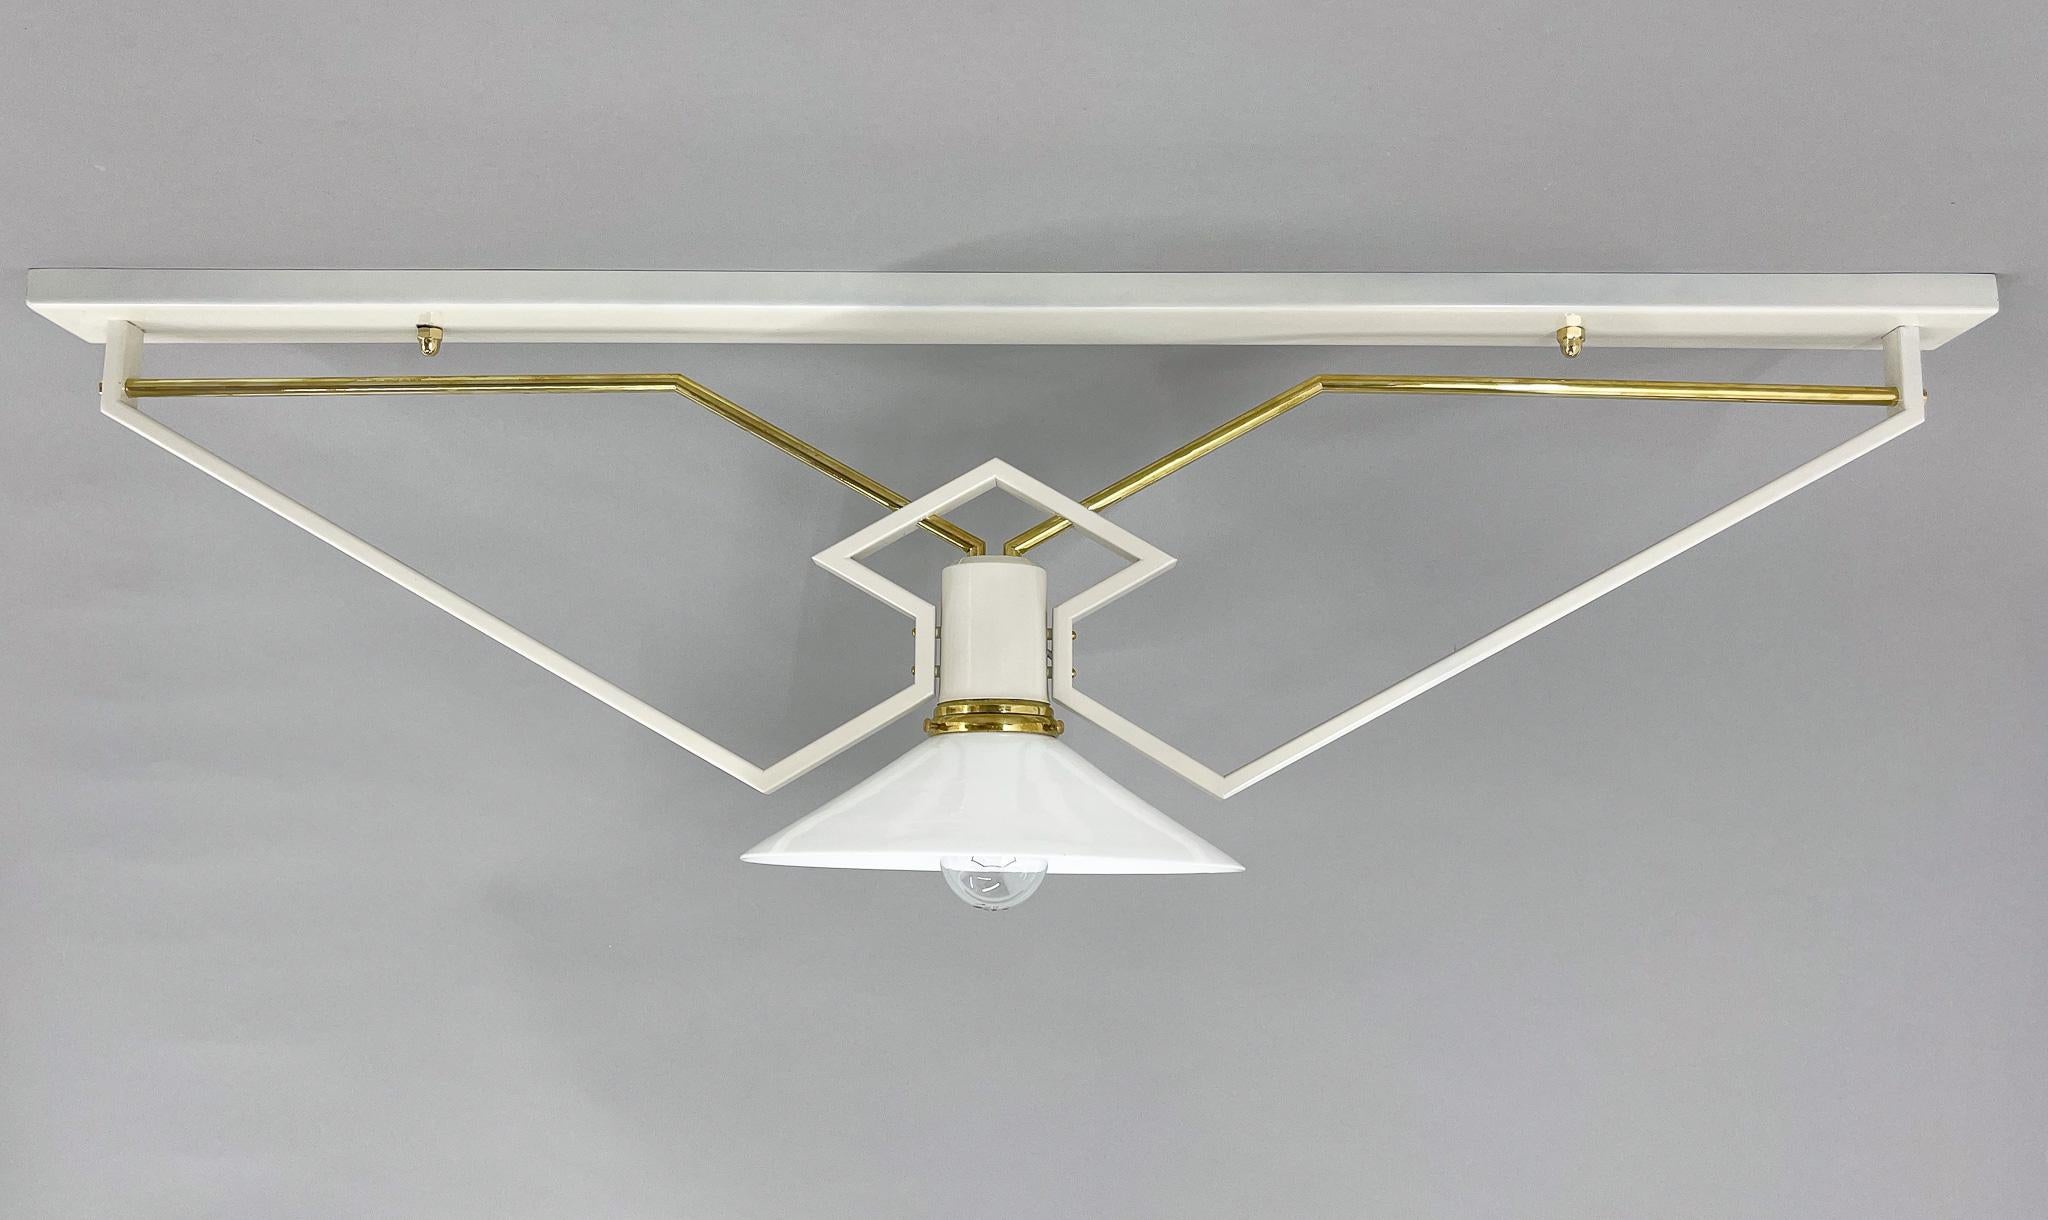 Czech 1950s Unique Ceiling Lights with Brass Details, Restored, 4 pieces available For Sale